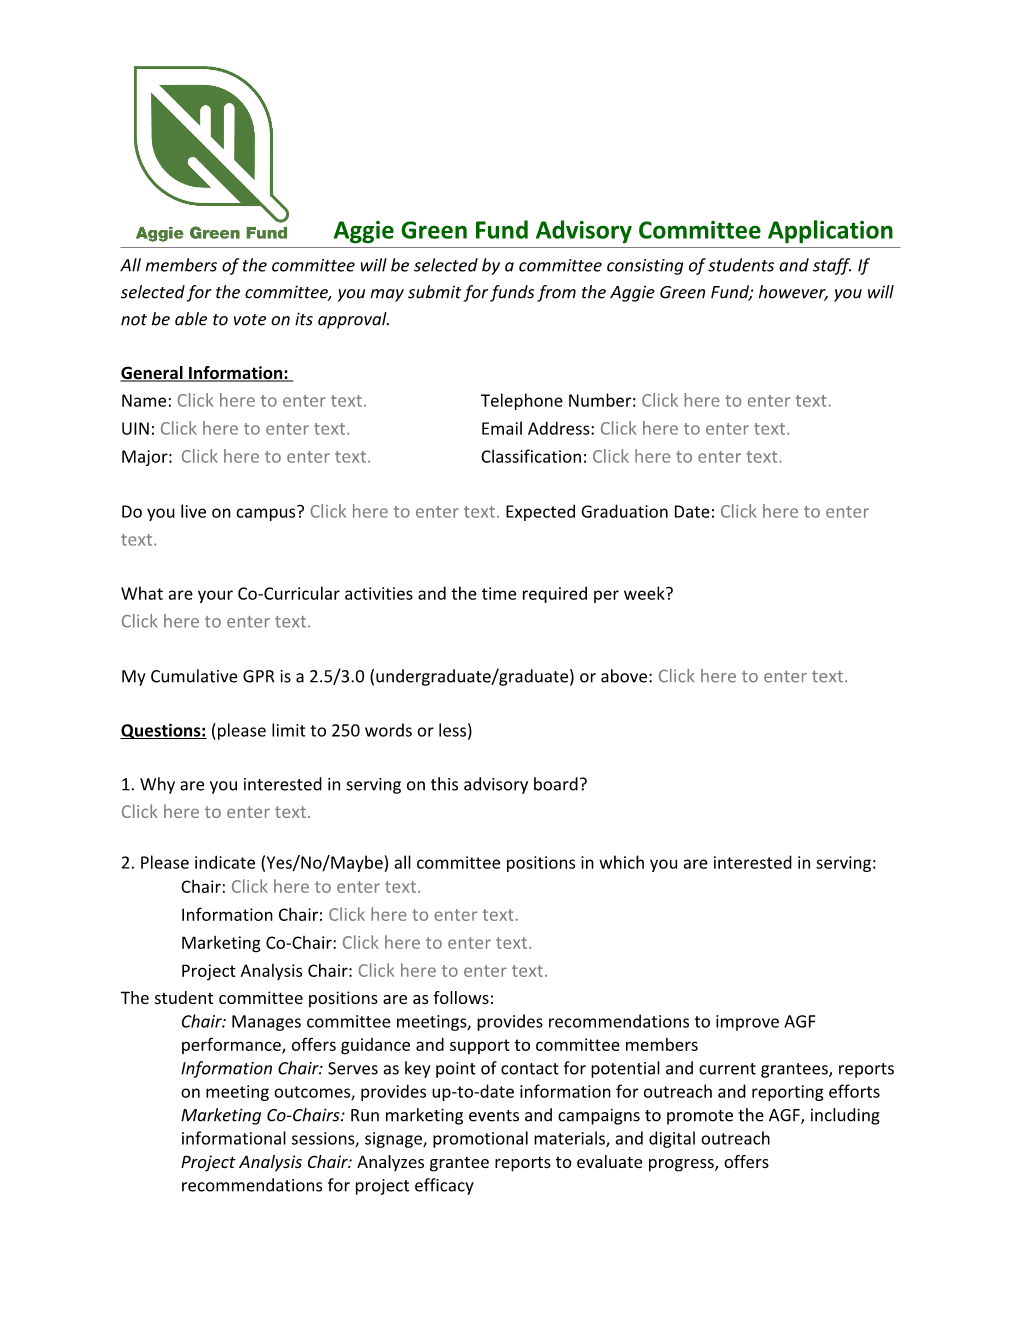 Aggie Green Fund Advisory Committee Application